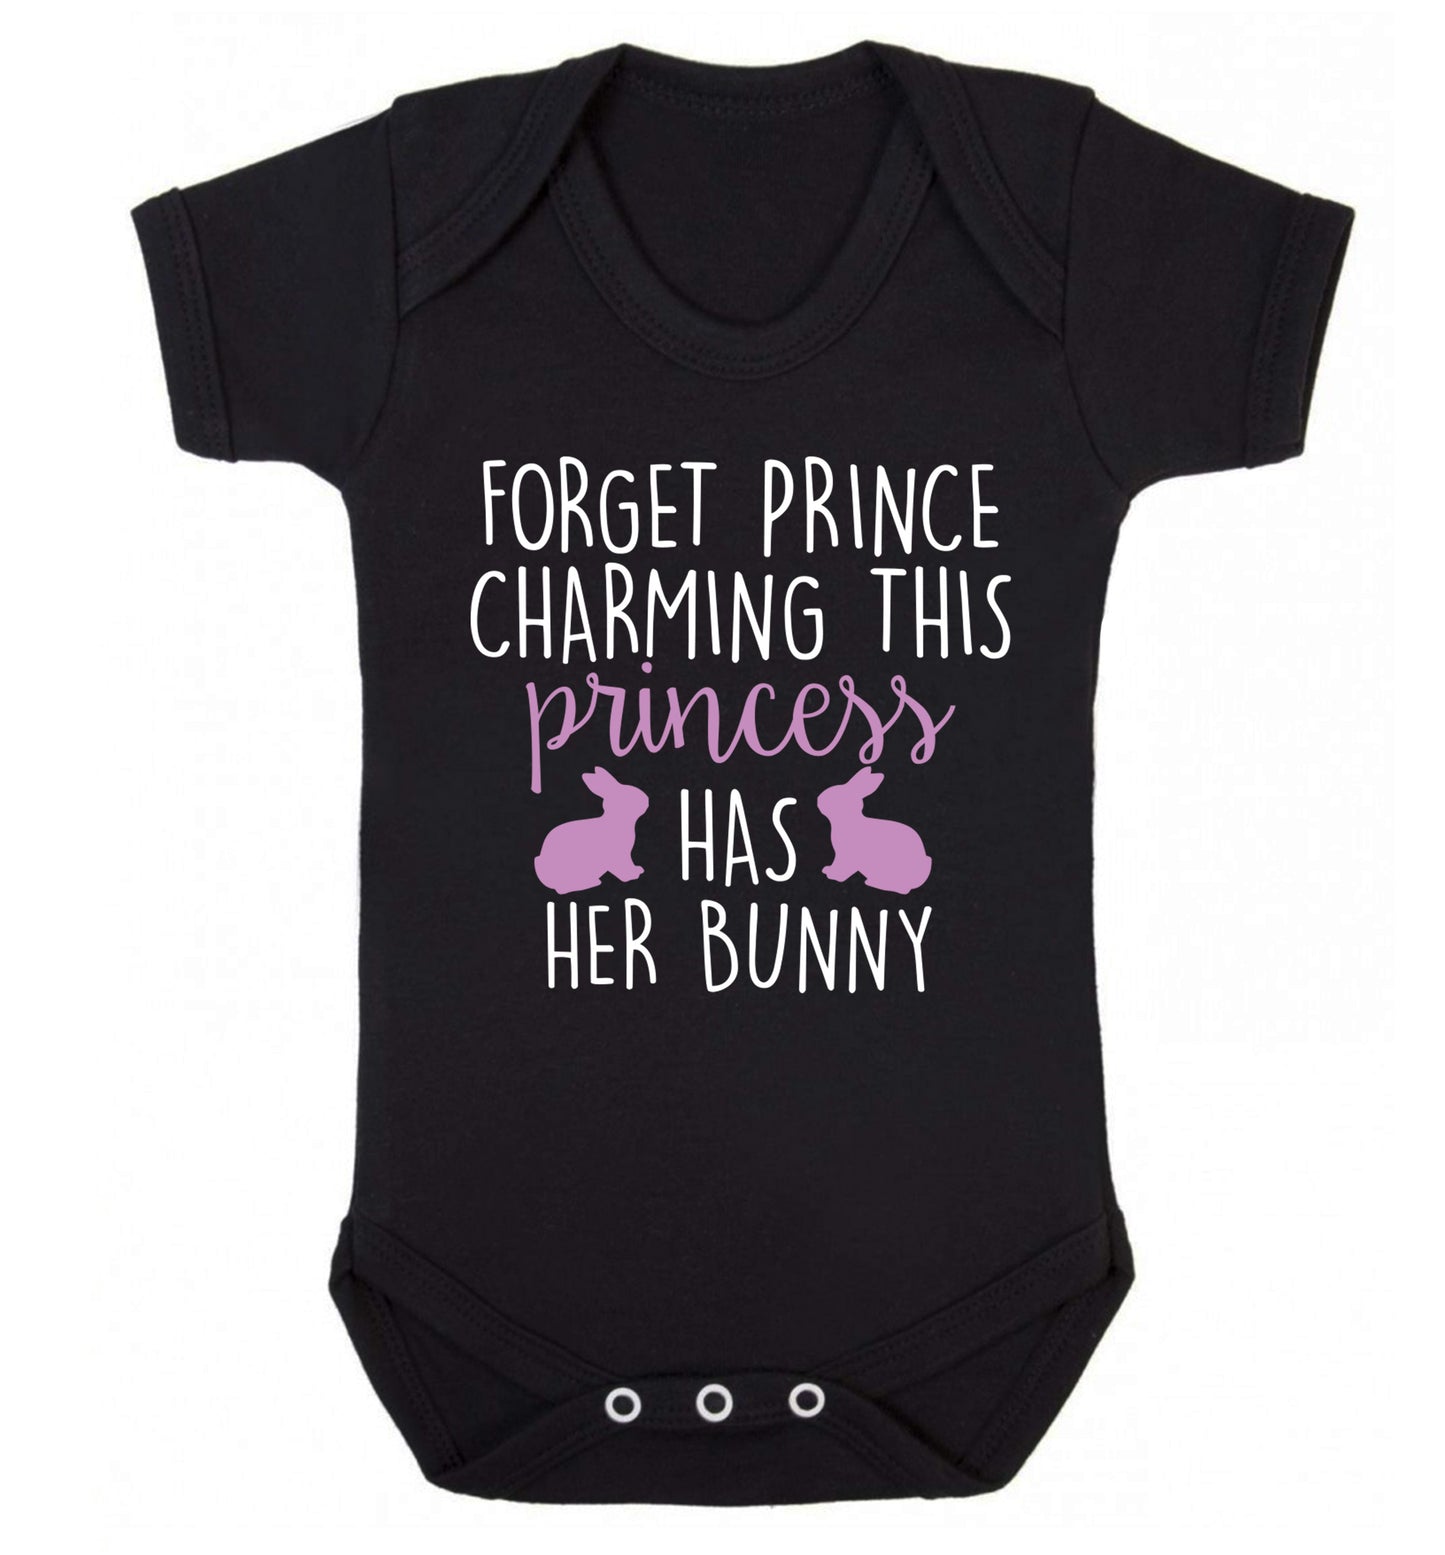 Forget prince charming this princess has her bunny Baby Vest black 18-24 months